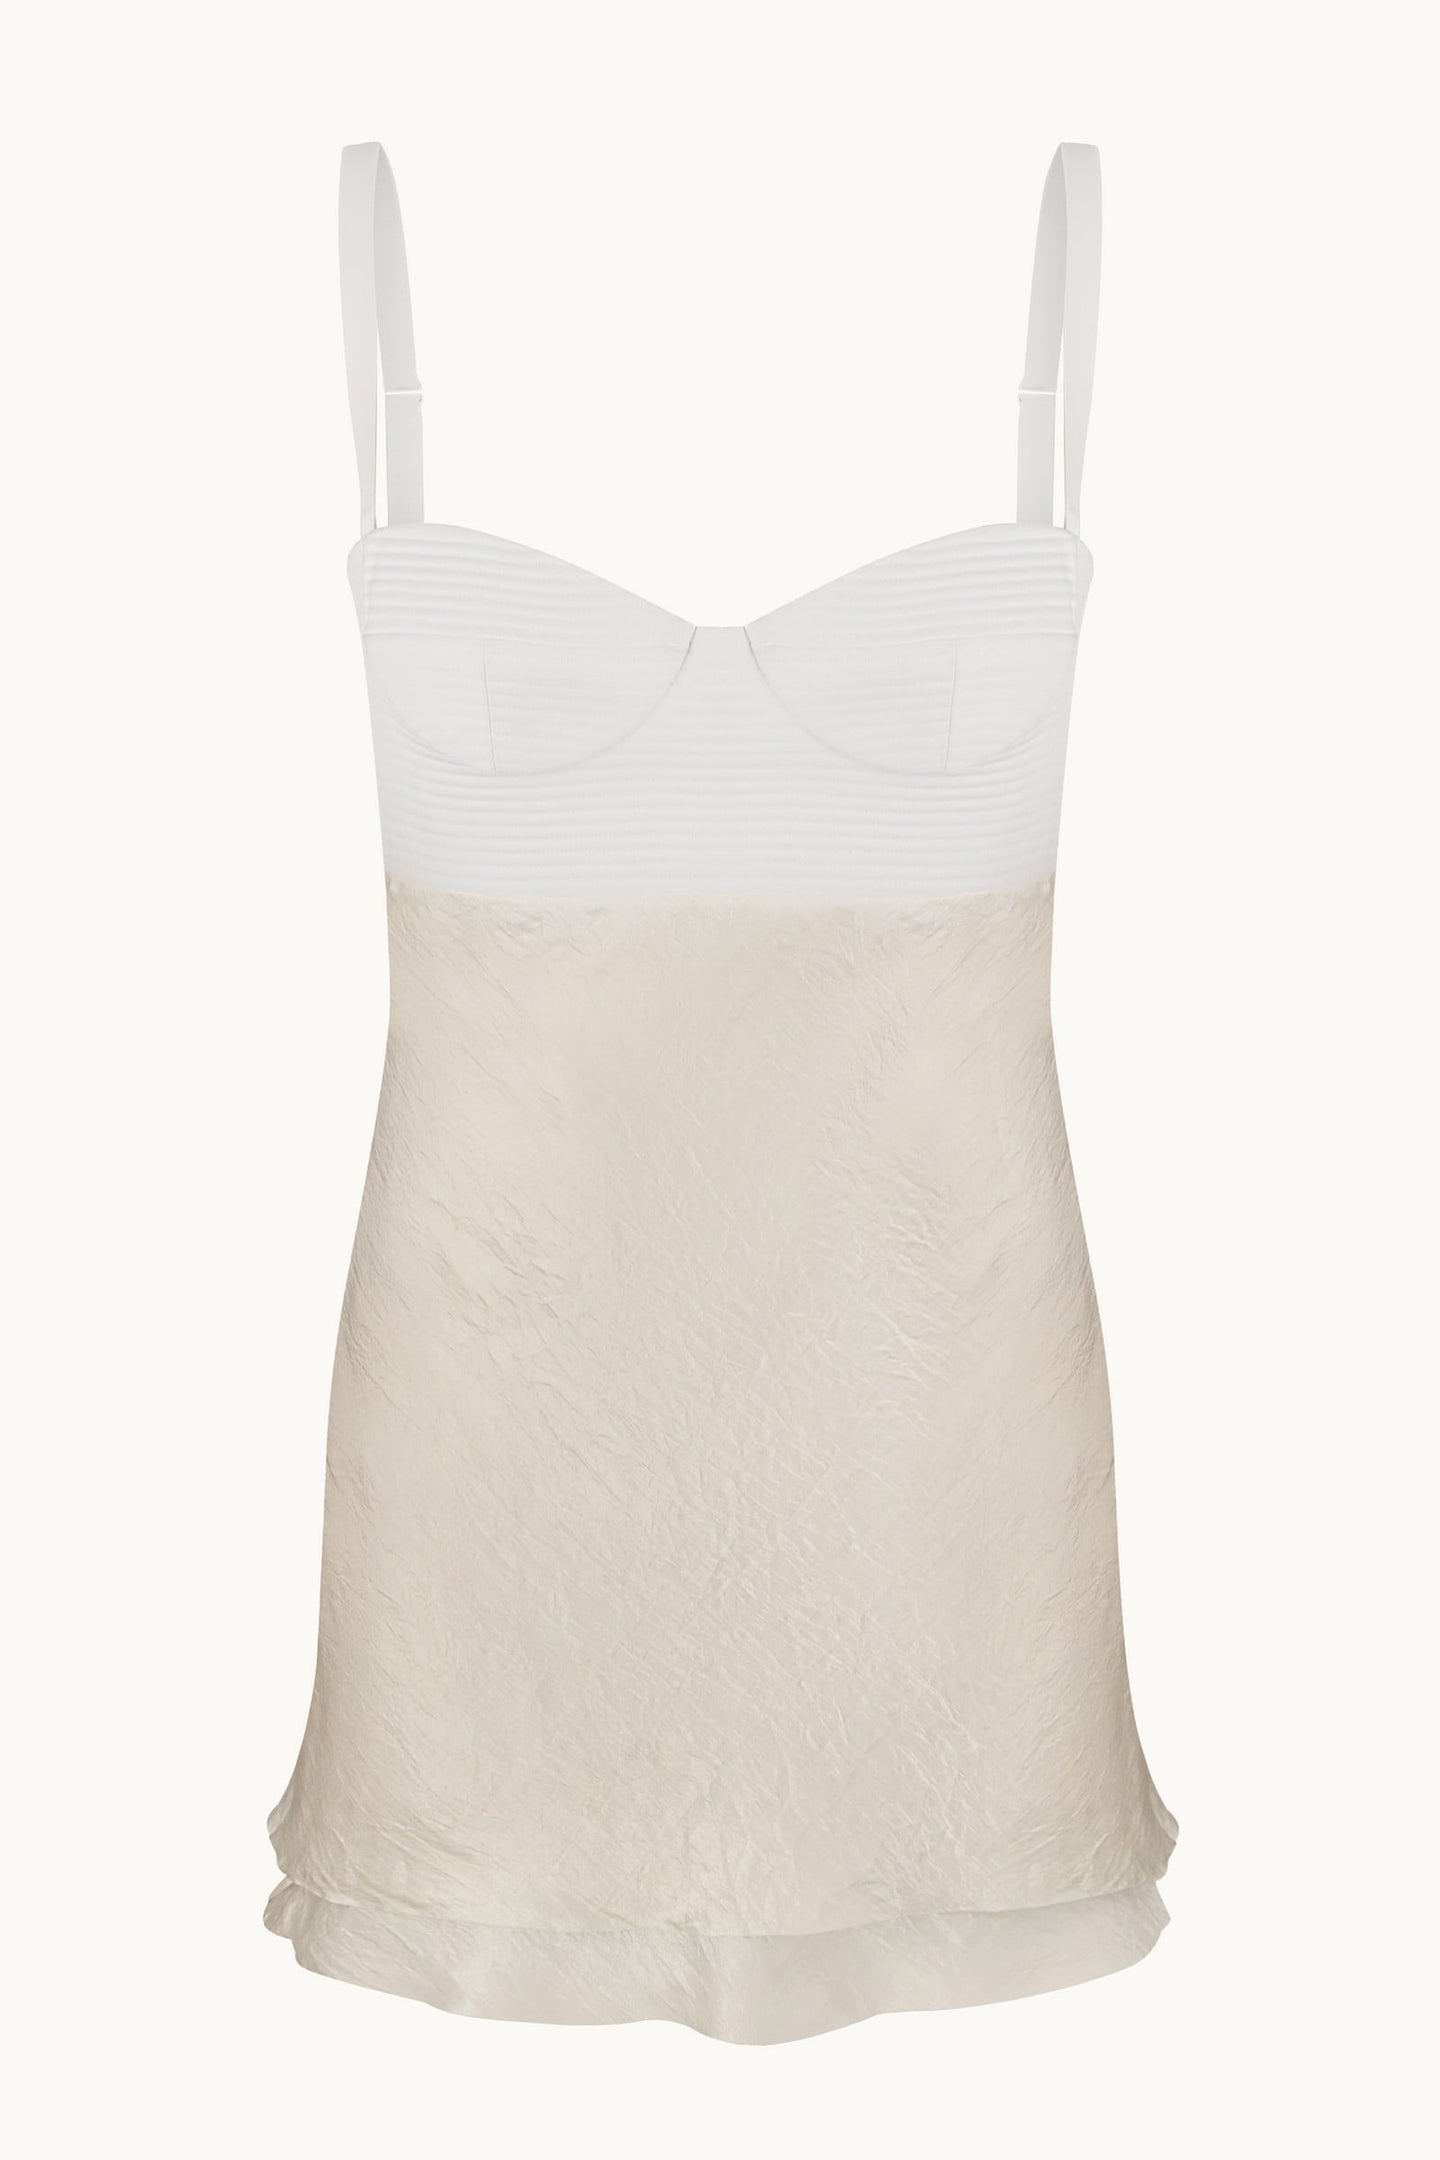 Tayra ivory dress front view